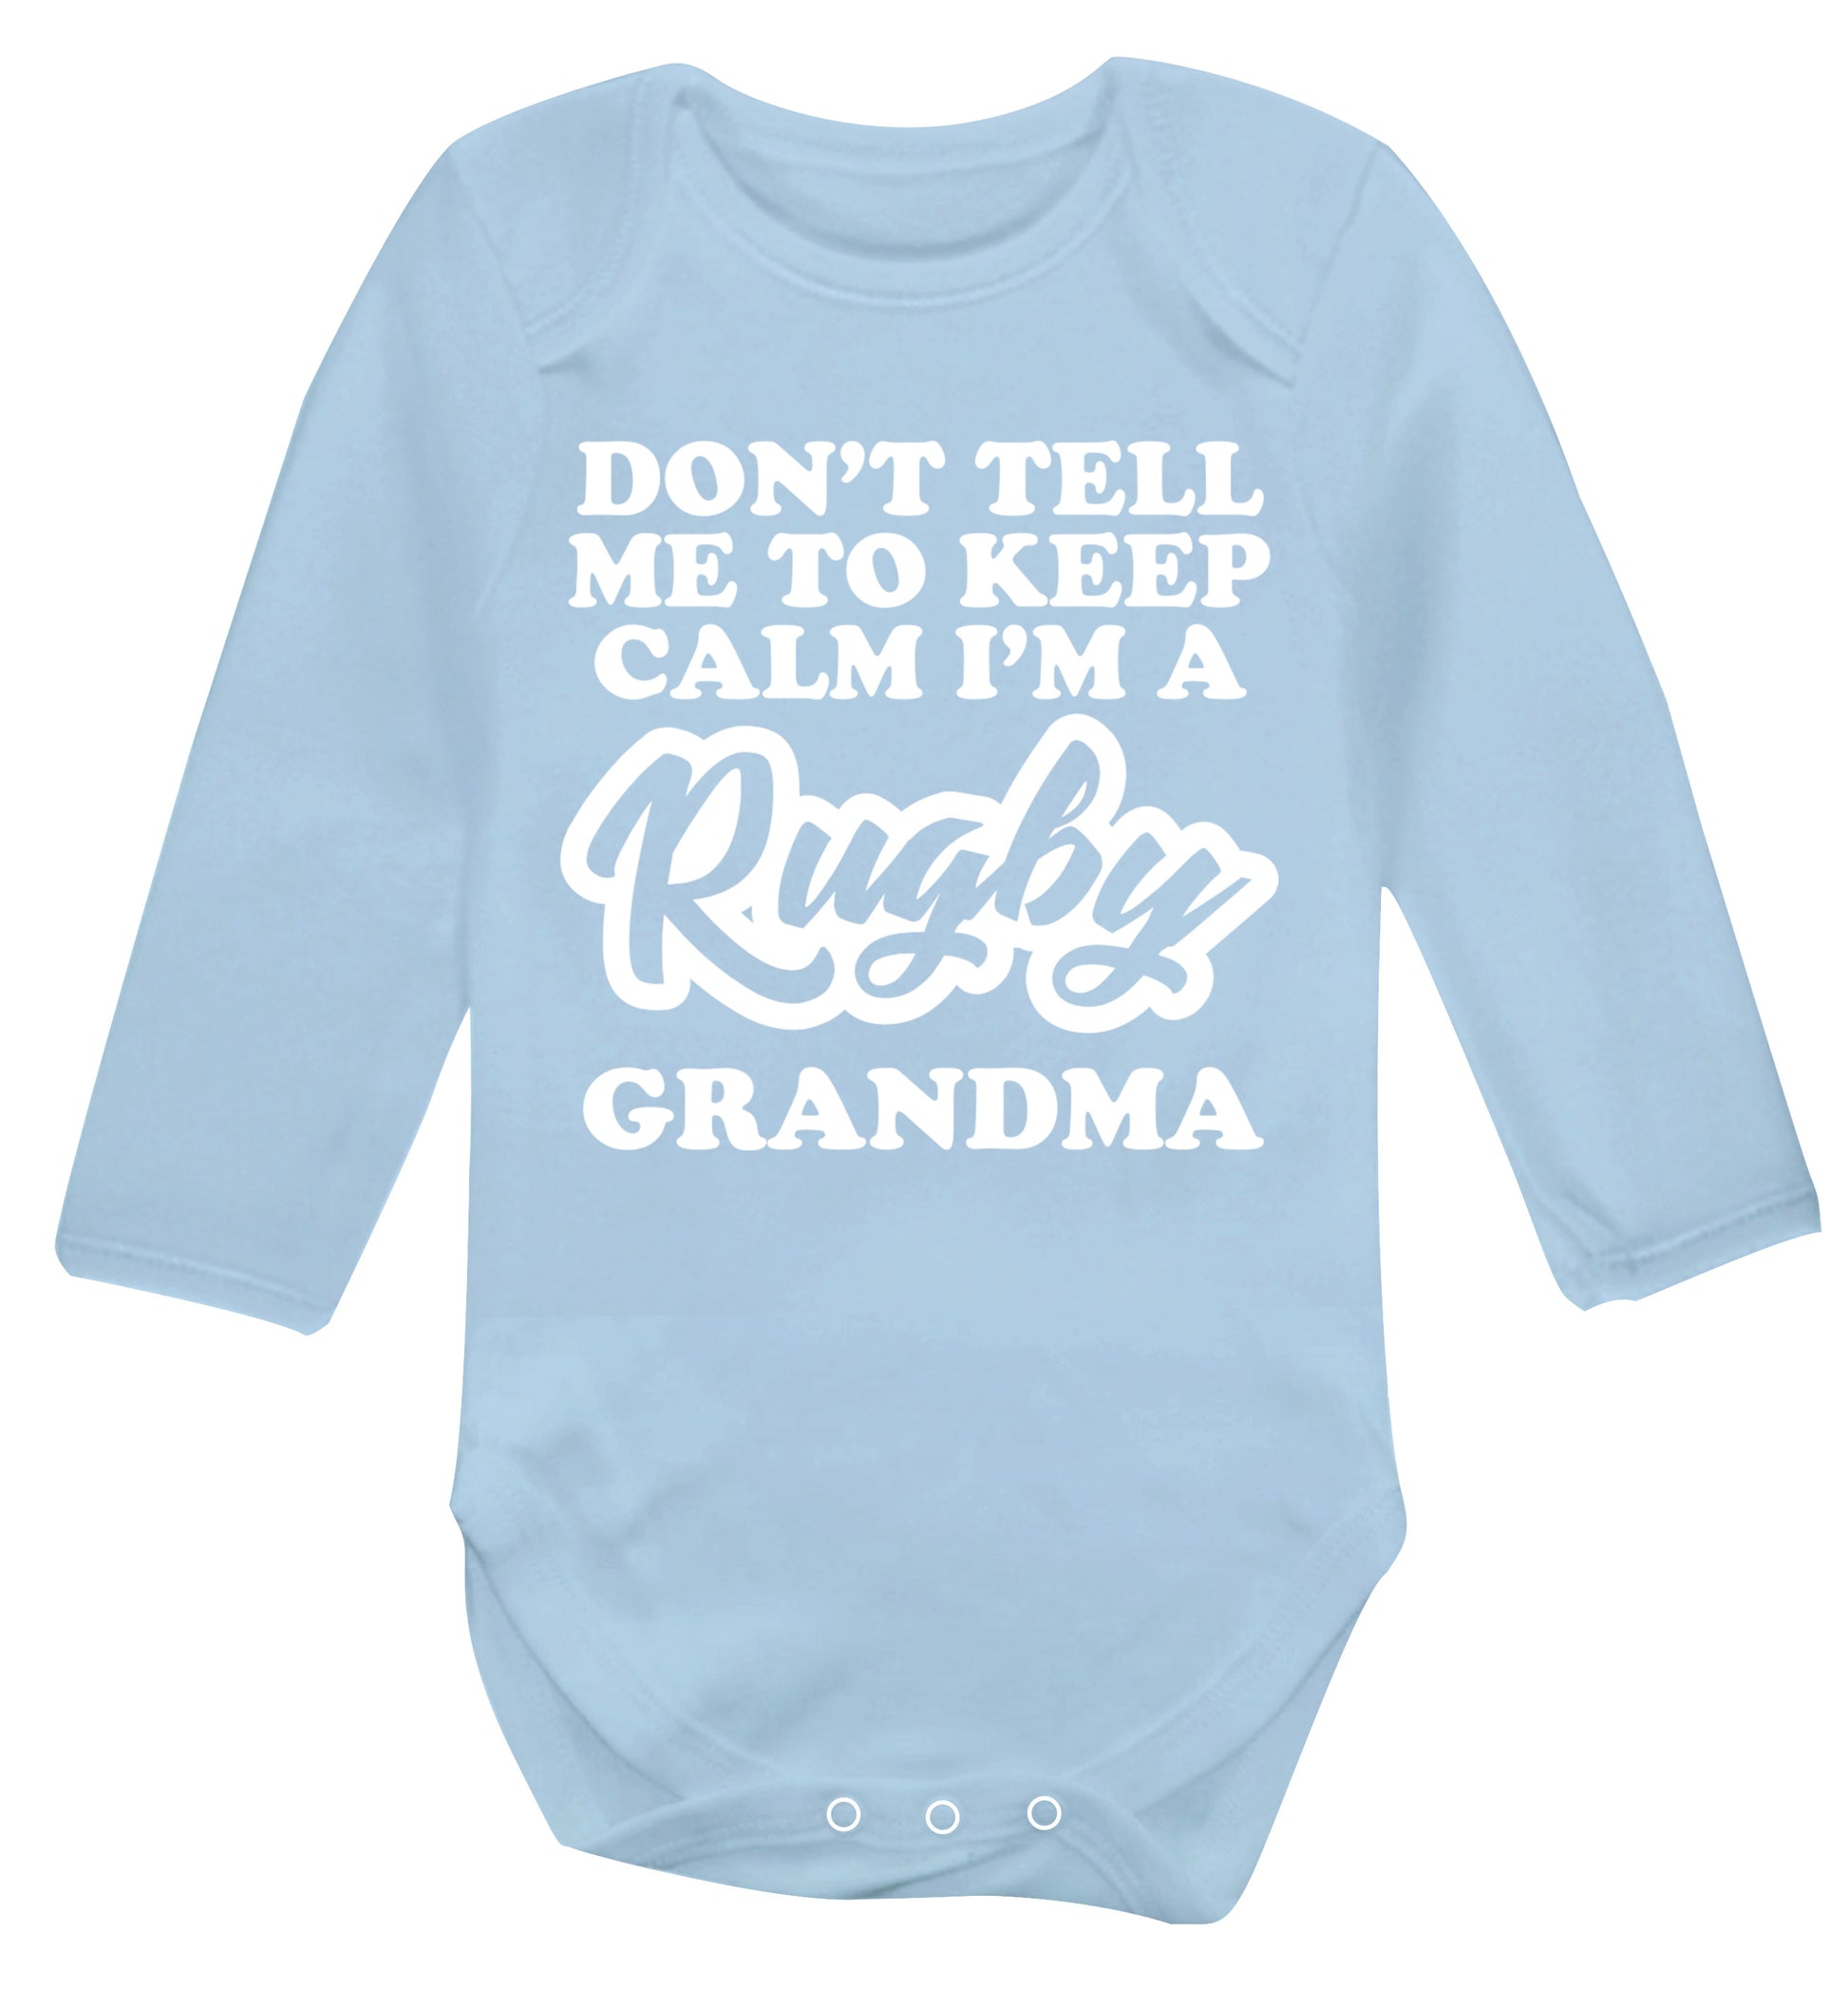 Don't tell me to keep calm I'm a rugby grandma Baby Vest long sleeved pale blue 6-12 months